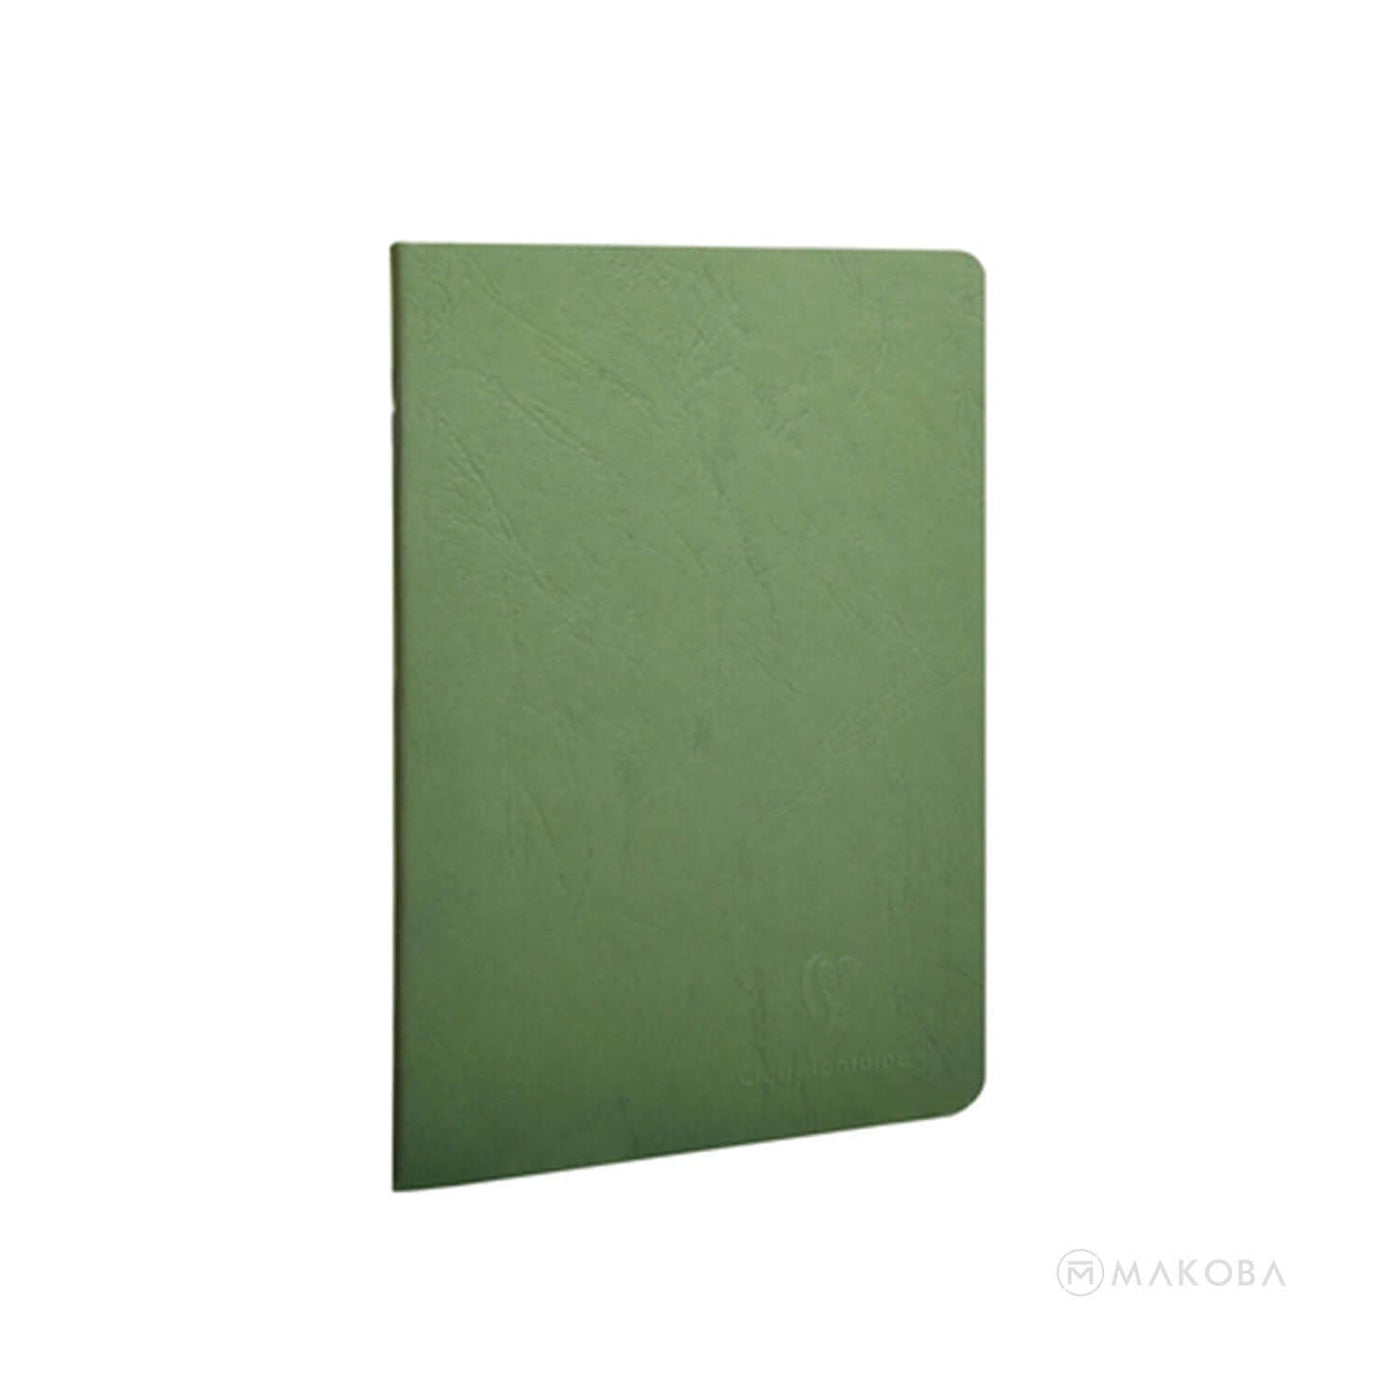 CLAIREFONTAINE AGE BAG SERIES GREEN RULED NOTEBOOK